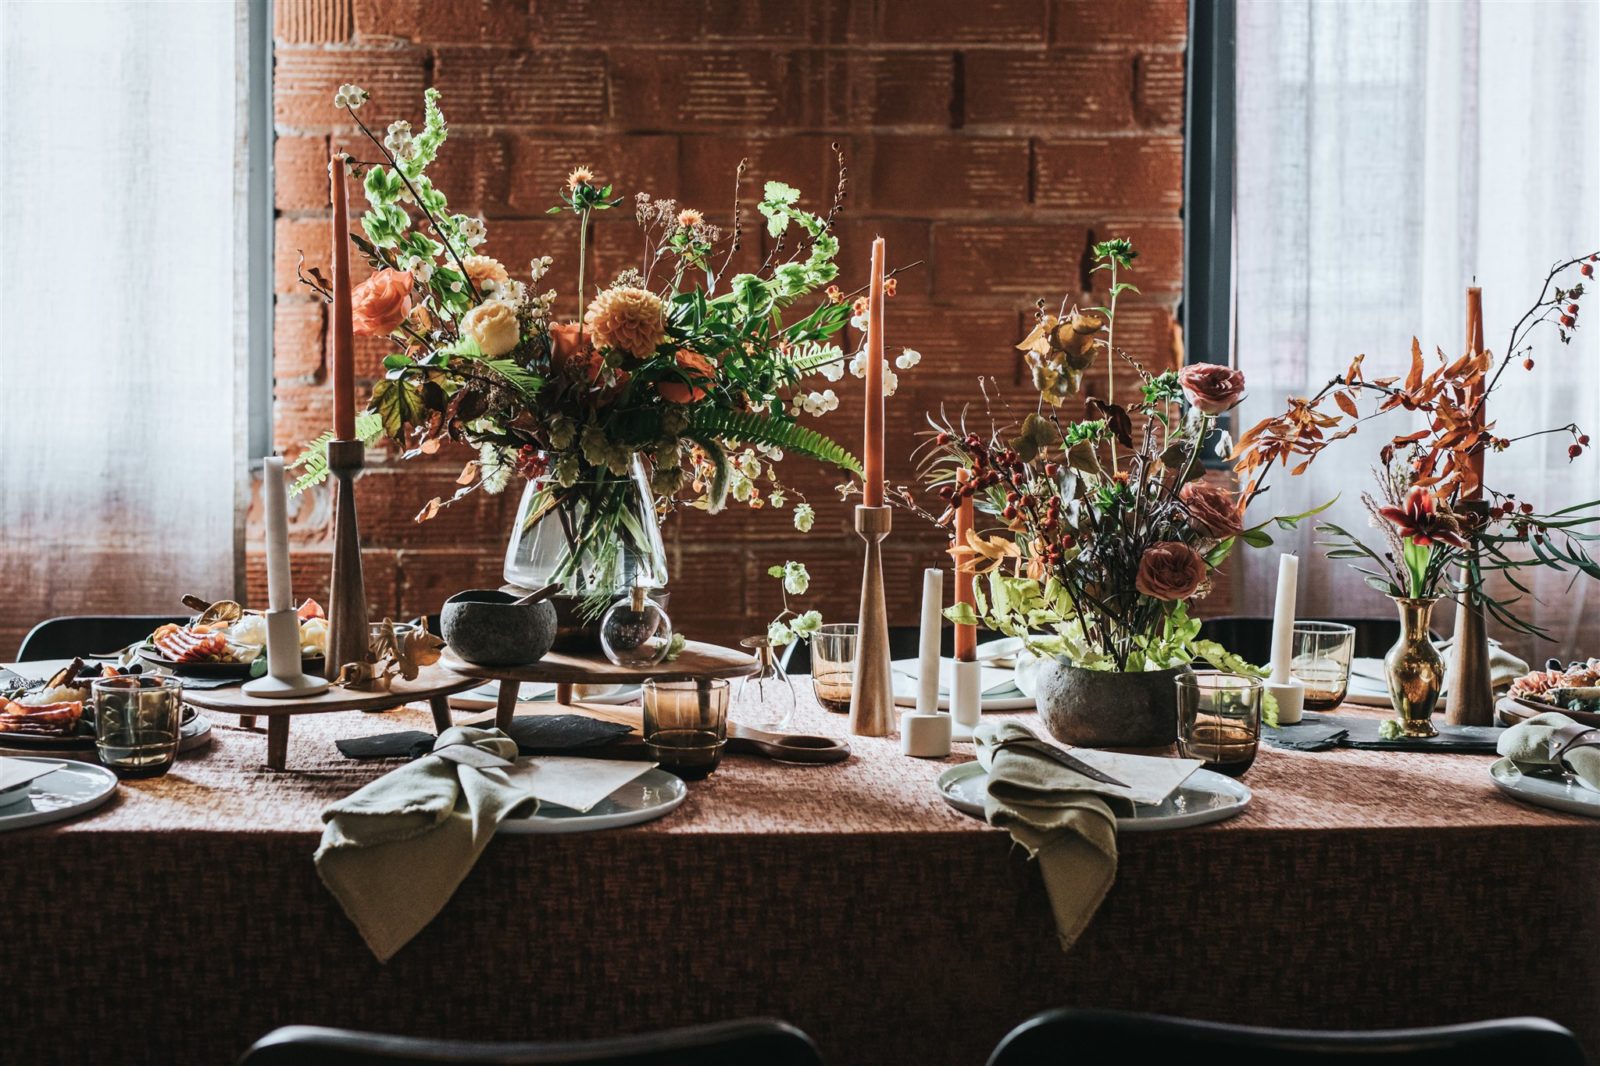 Wild and organic nature-inspired wedding table decor for a fall wedding with olive, sage and brown tones